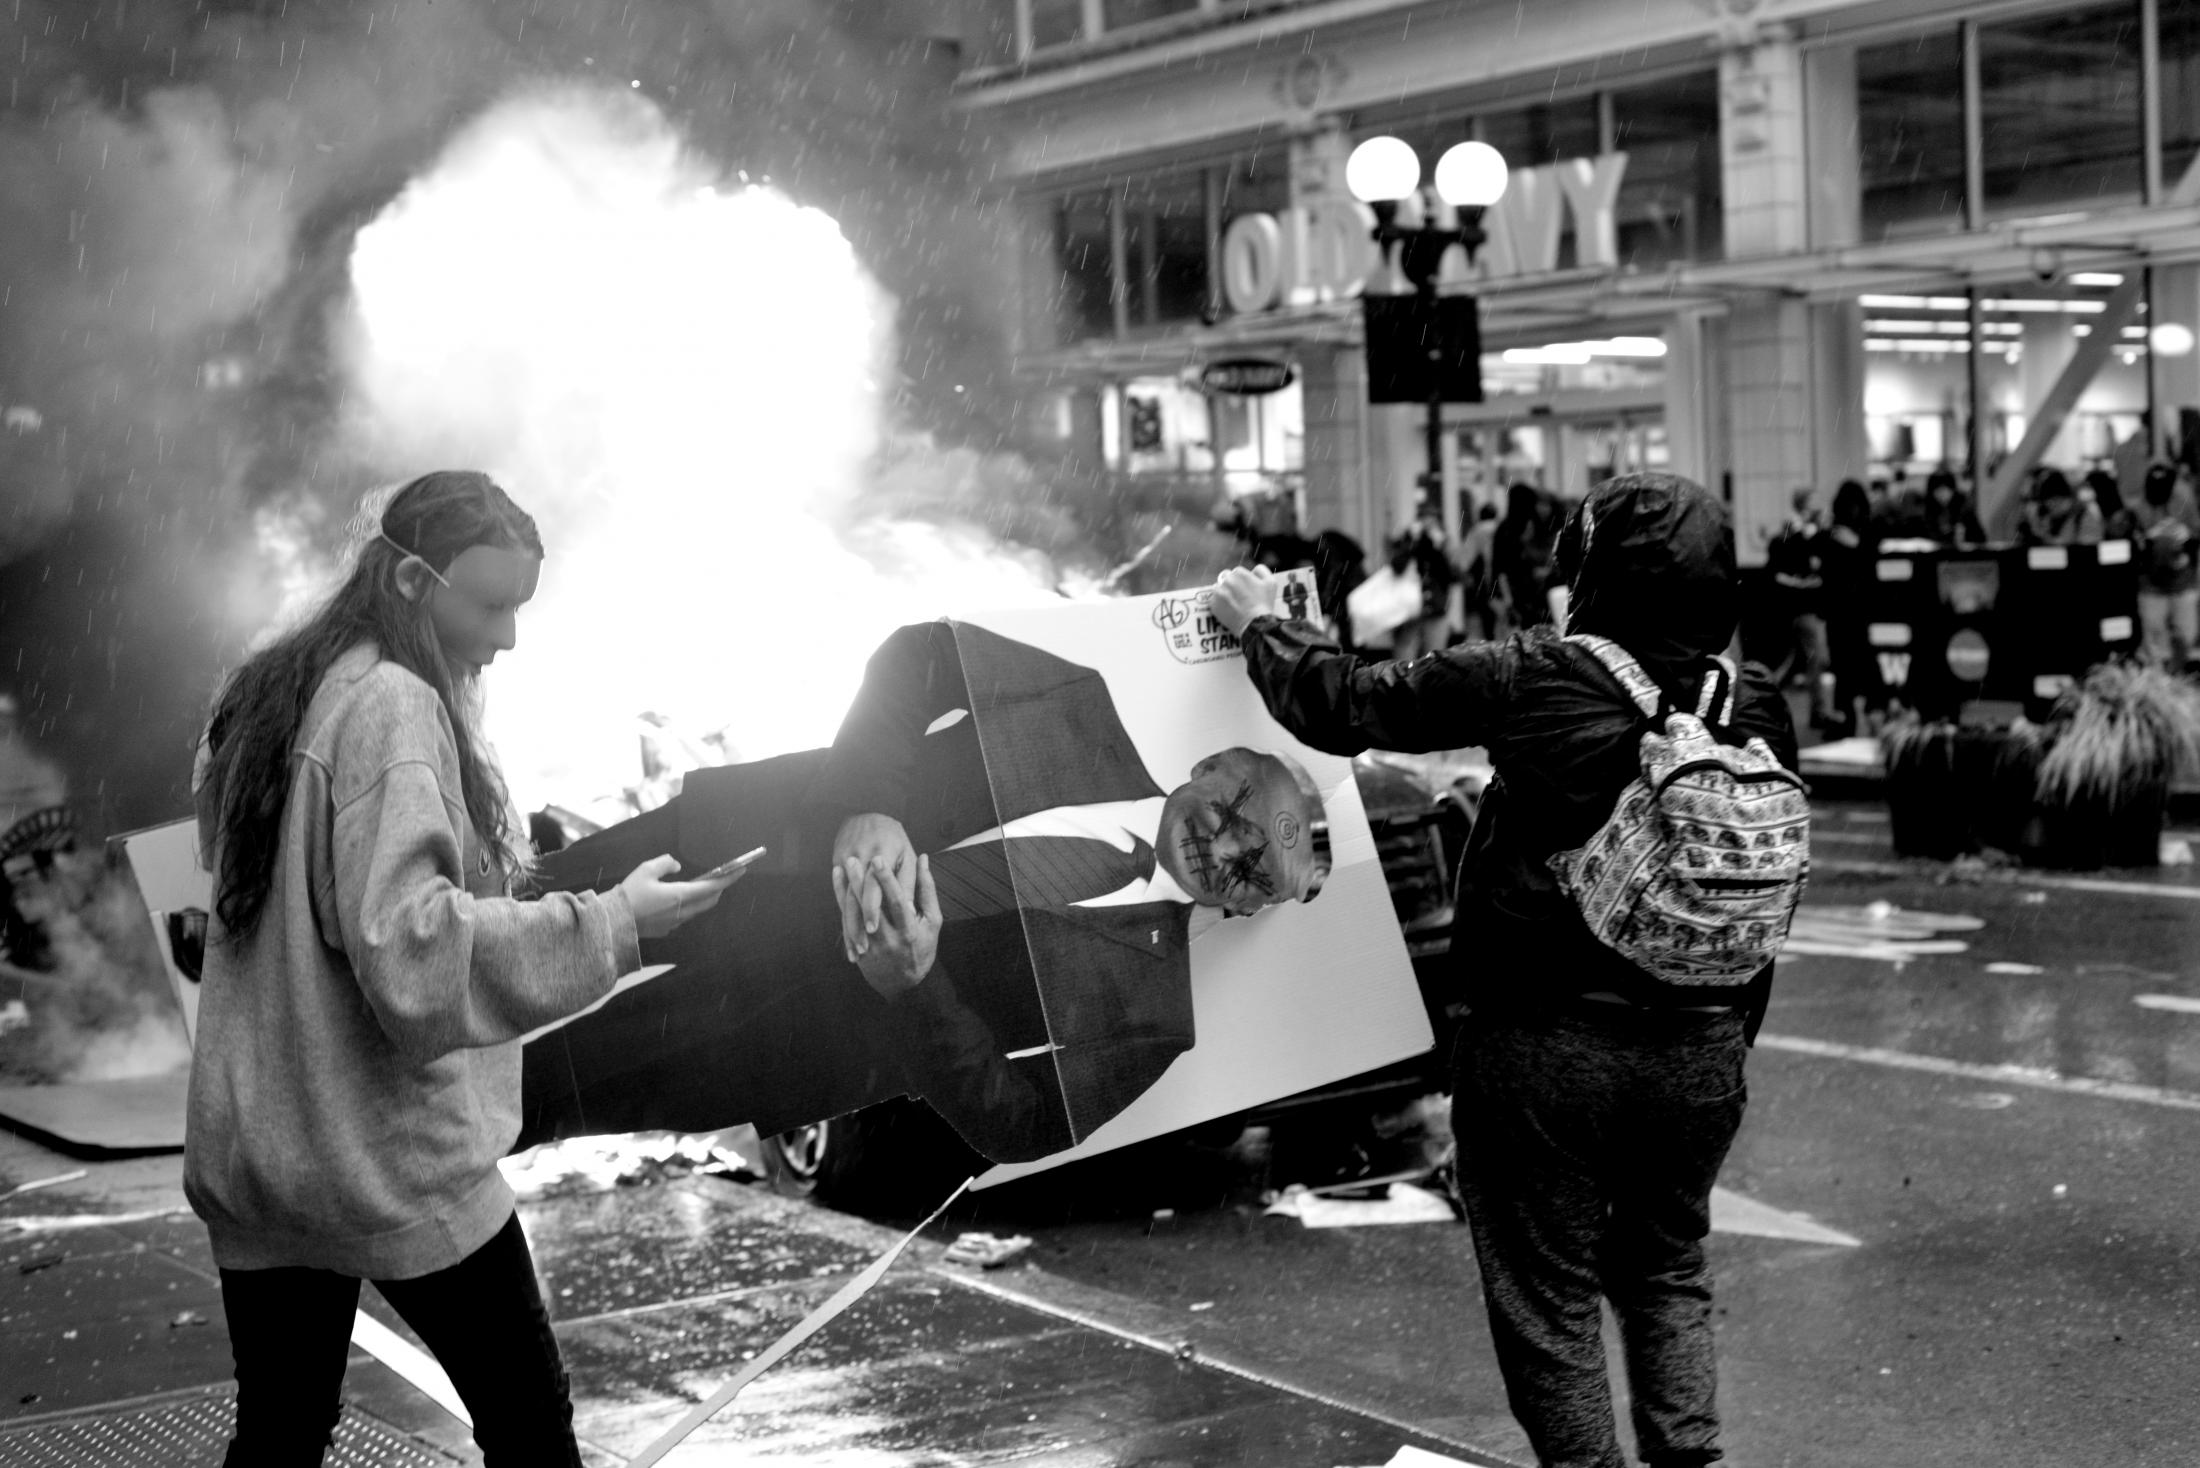 George Floyd Protests in Seattle, Washington - Protestors about to burn a life size cardboard poster of...